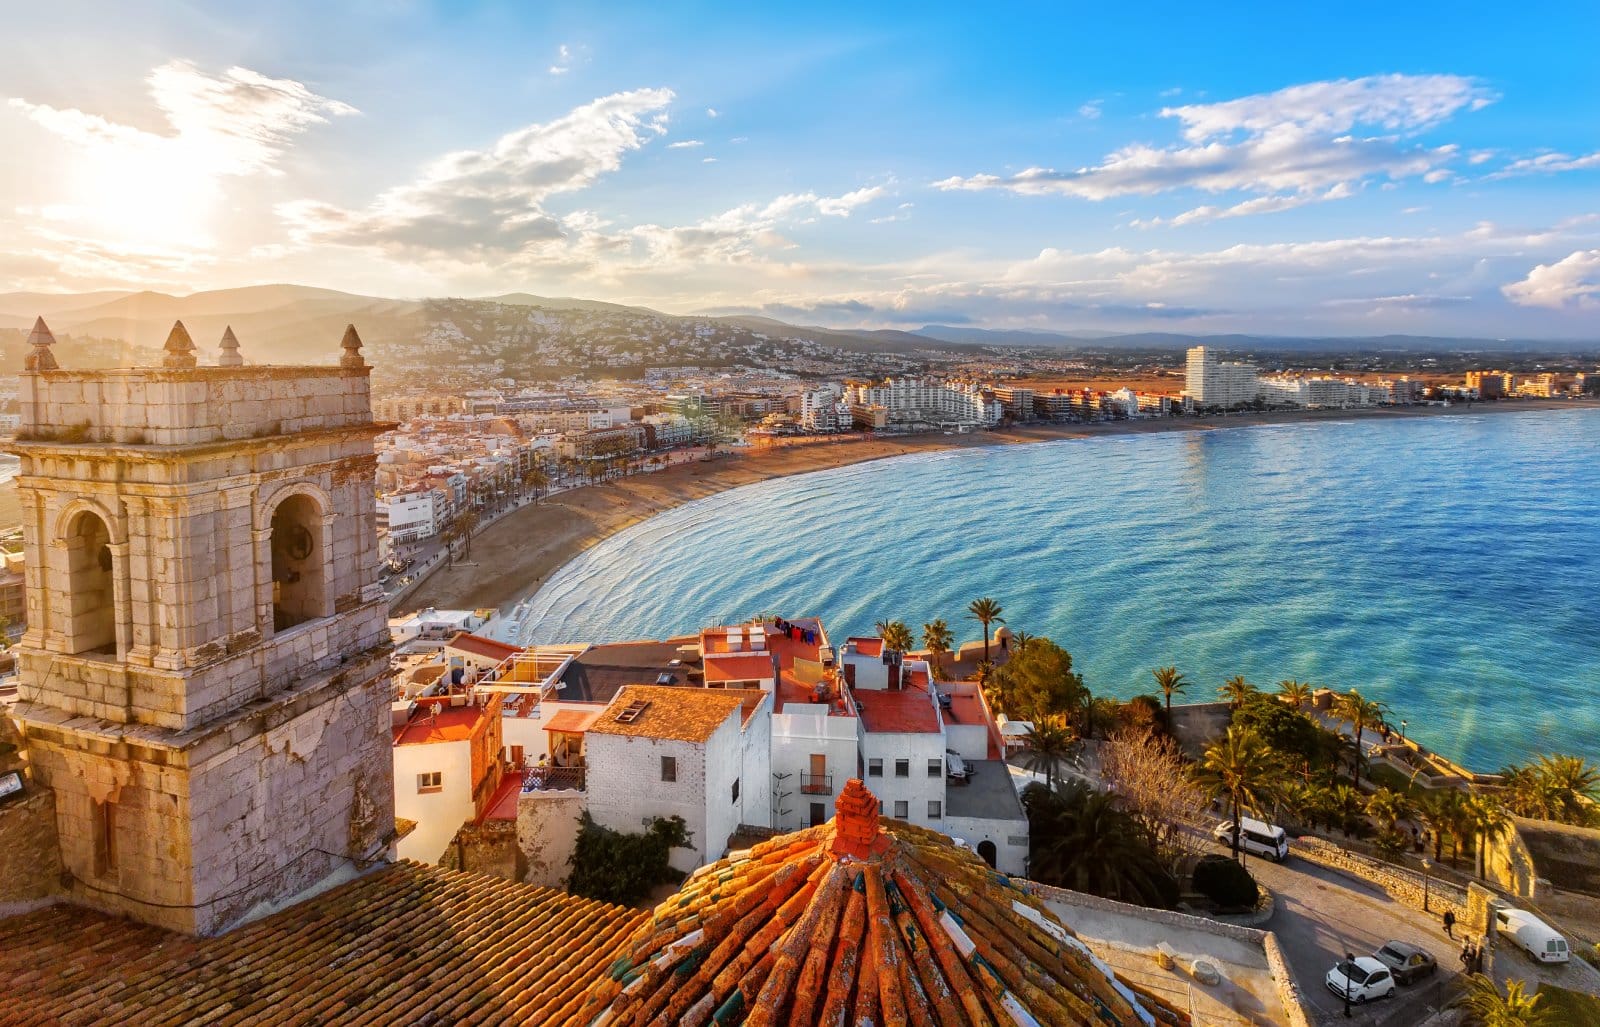 <p><span>While some have reported that the application is long, complicated, and expensive, obtaining a Spanish DN visa will allow you to soak up the Mediterranean sun all year round.</span></p><p><b>Cost of application:</b><span> 75 EUR</span></p><p><b>Income requirement:</b><span> 2334 EUR per month</span></p><p><b>Visa duration: </b><span>5 years</span> </p>